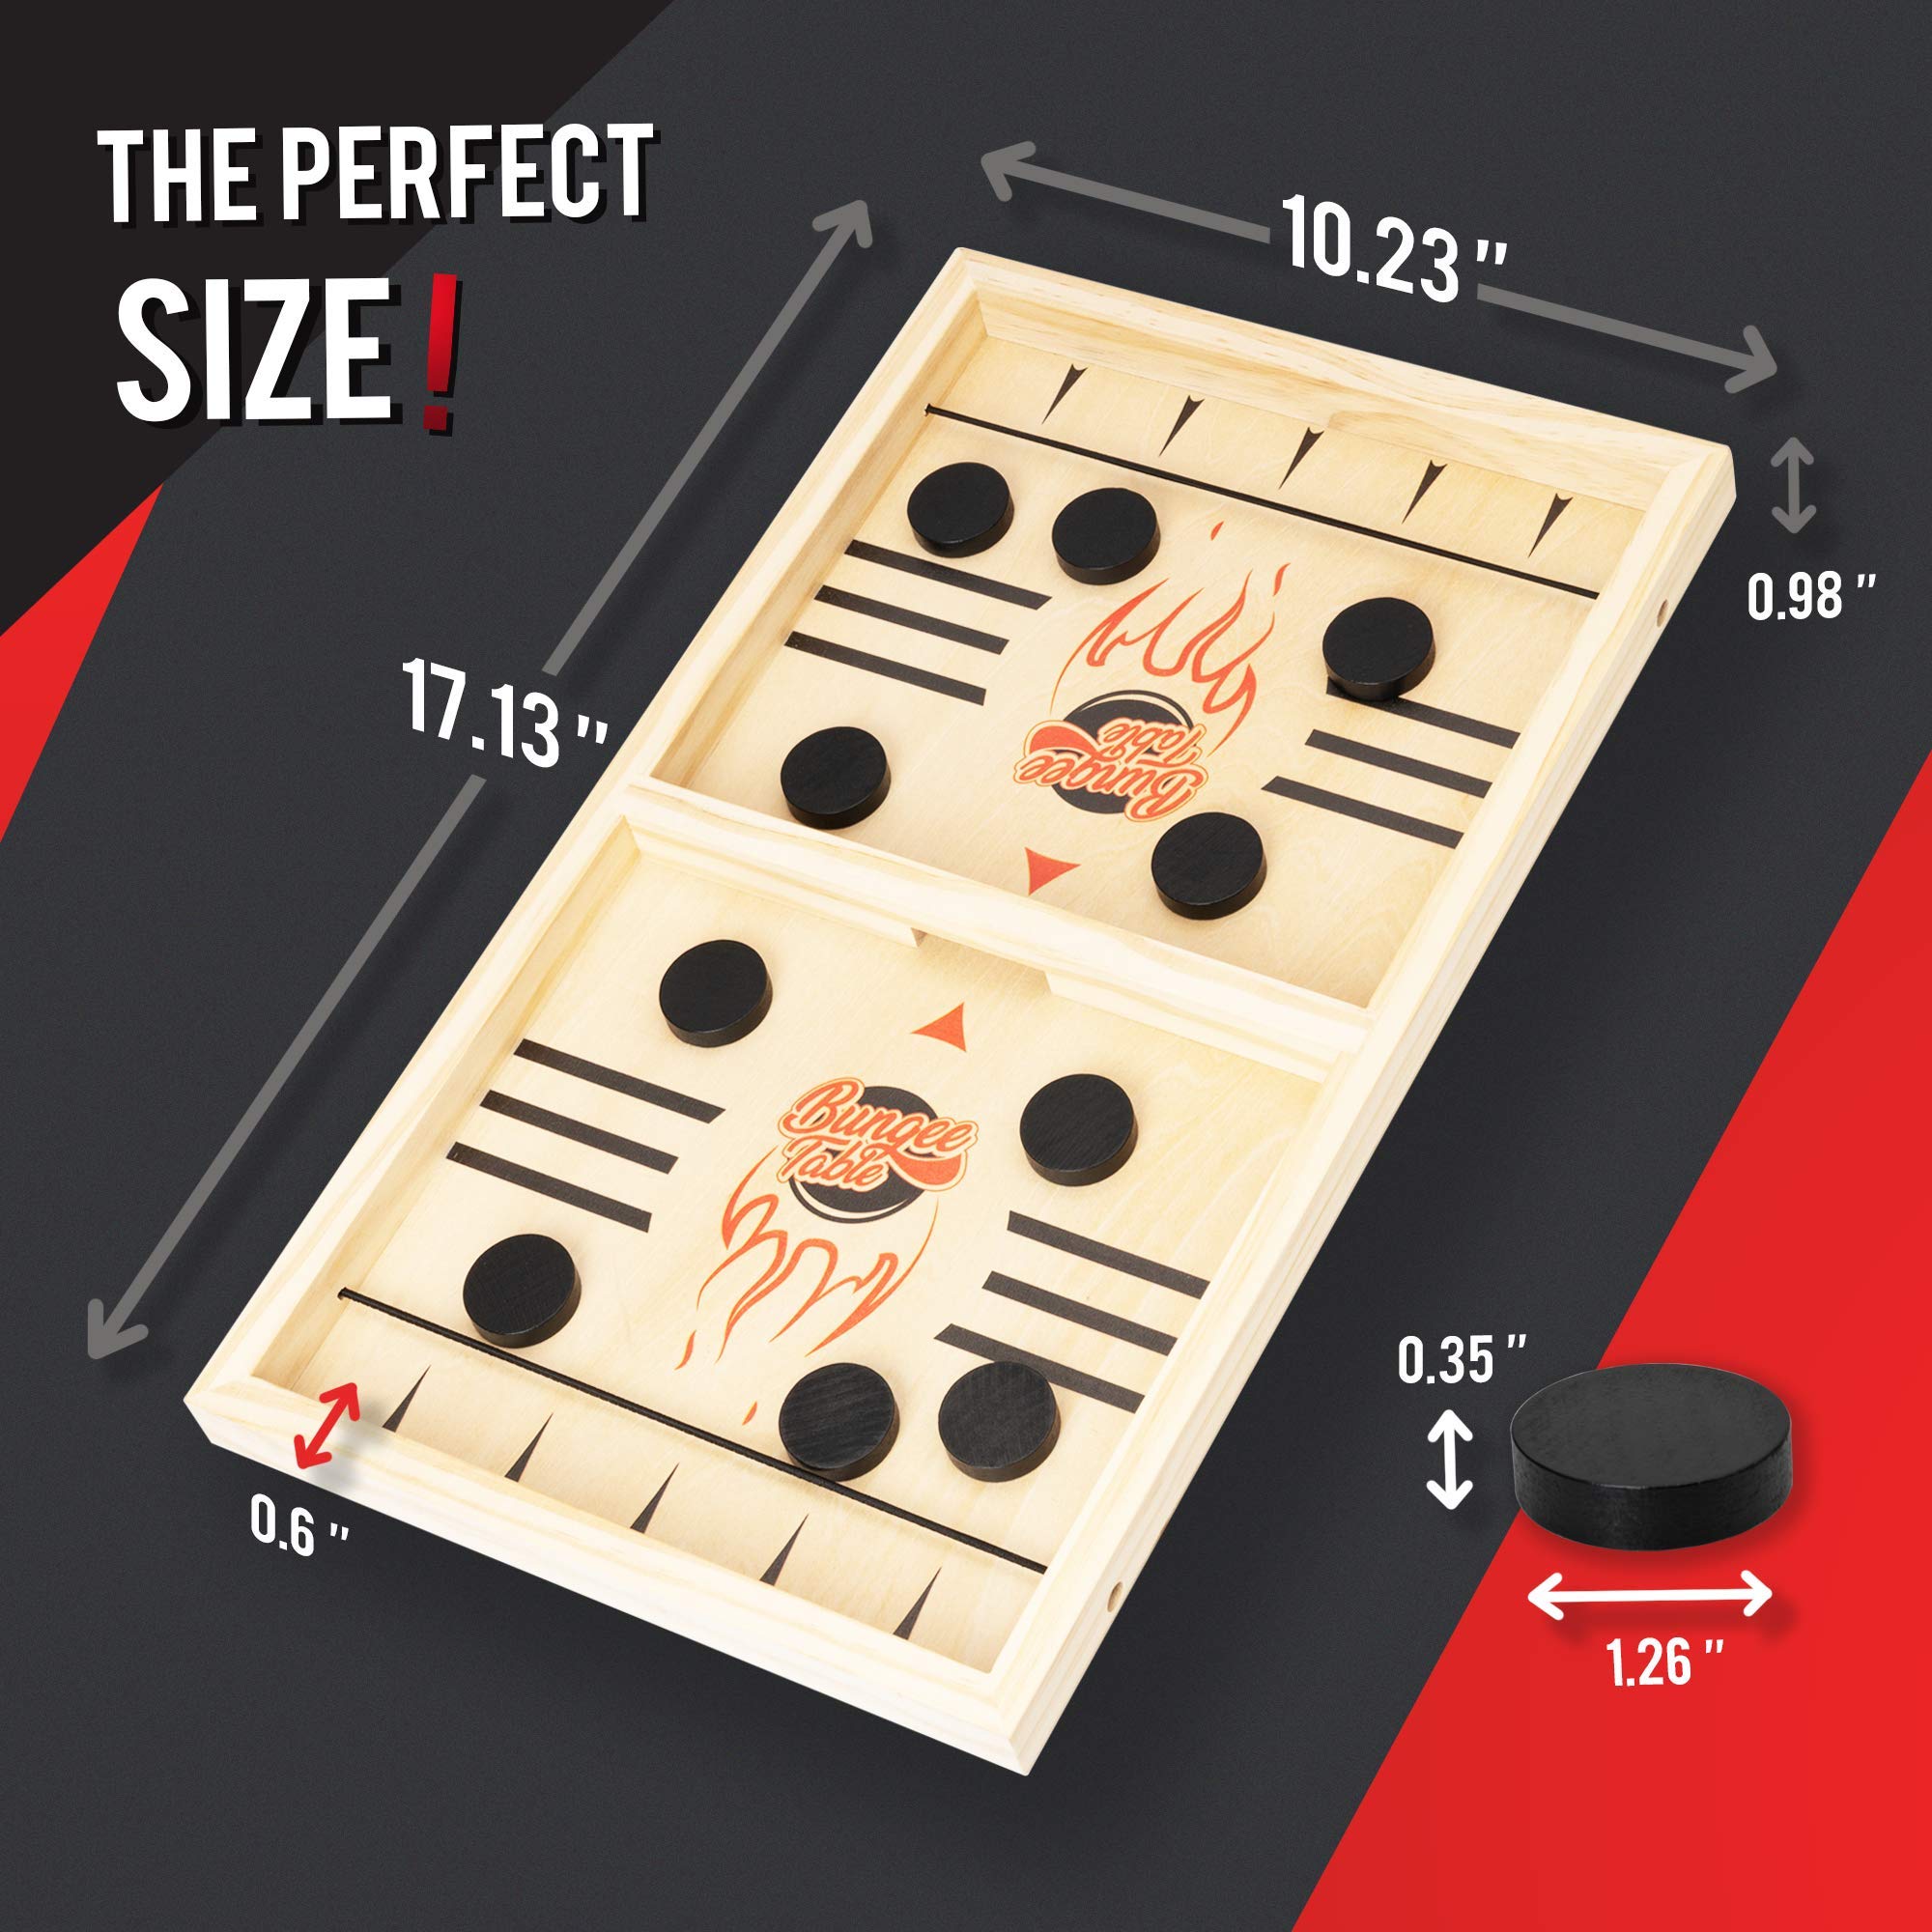 Bungee Table - Large Fast Sling Puck Game - Fast-Paced Fun for a Family Game Night or for a Party with Friends - Test Your Speed and Accuracy with This Wooden Hockey Board Game